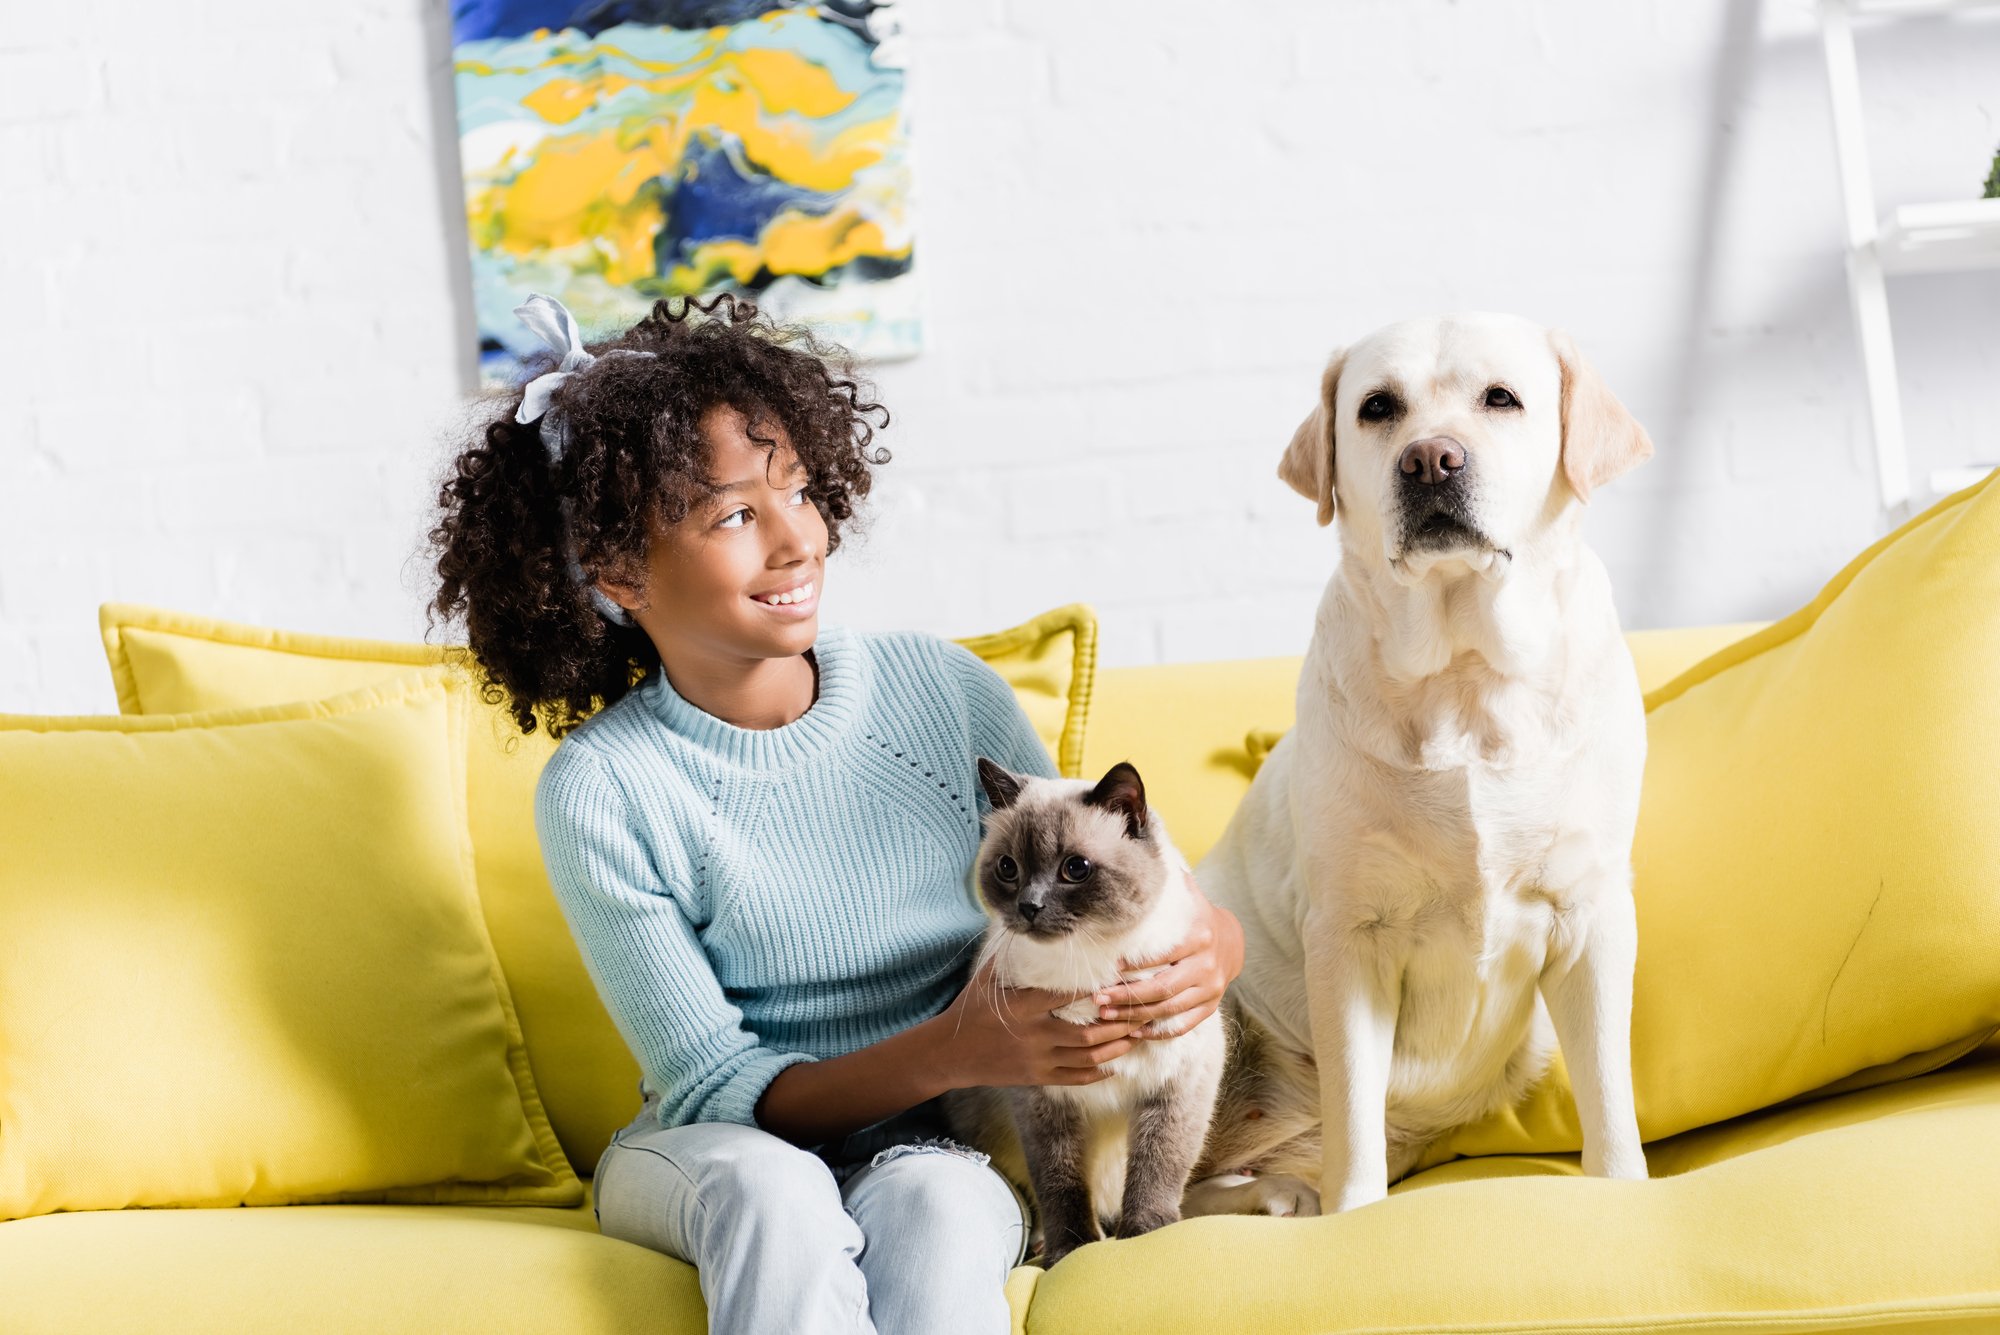 Cheerful girl with headband embracing siamese cat and looking at retriever sitting on yellow sofa, on blurred background